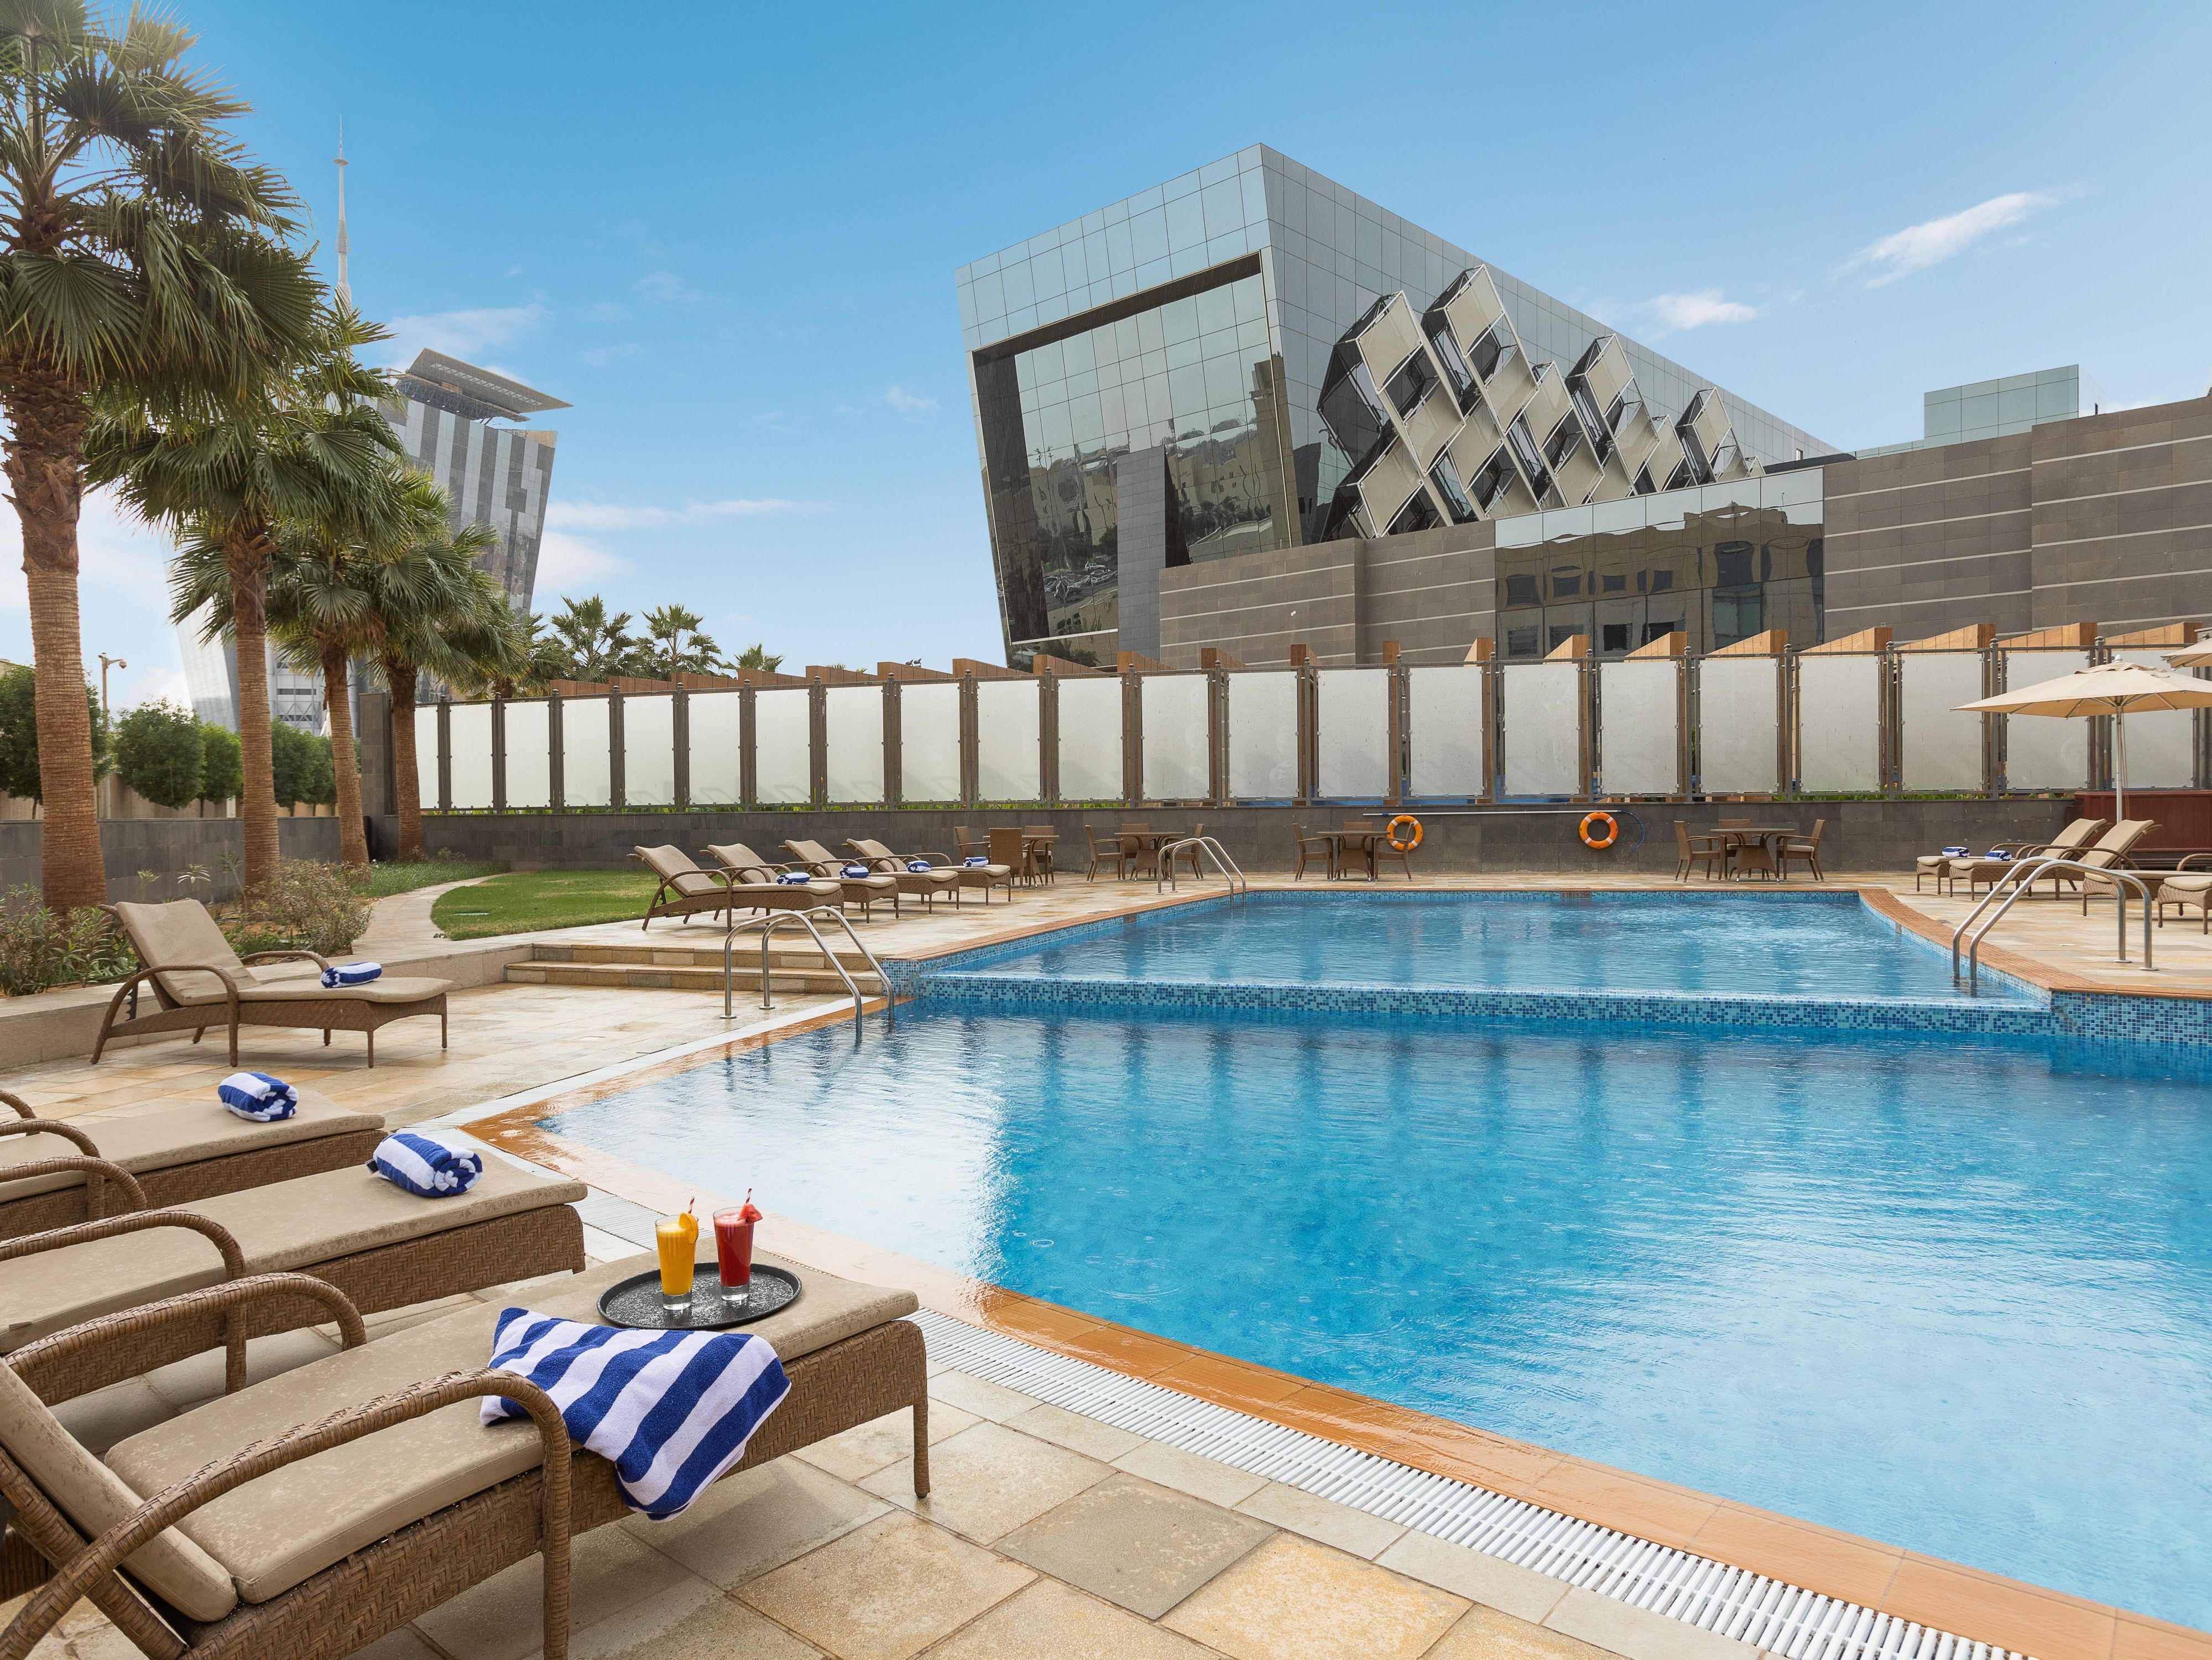 Sunny days? Head down and chill by the pool with refreshing cocktails and make this your most memorable stay ever.